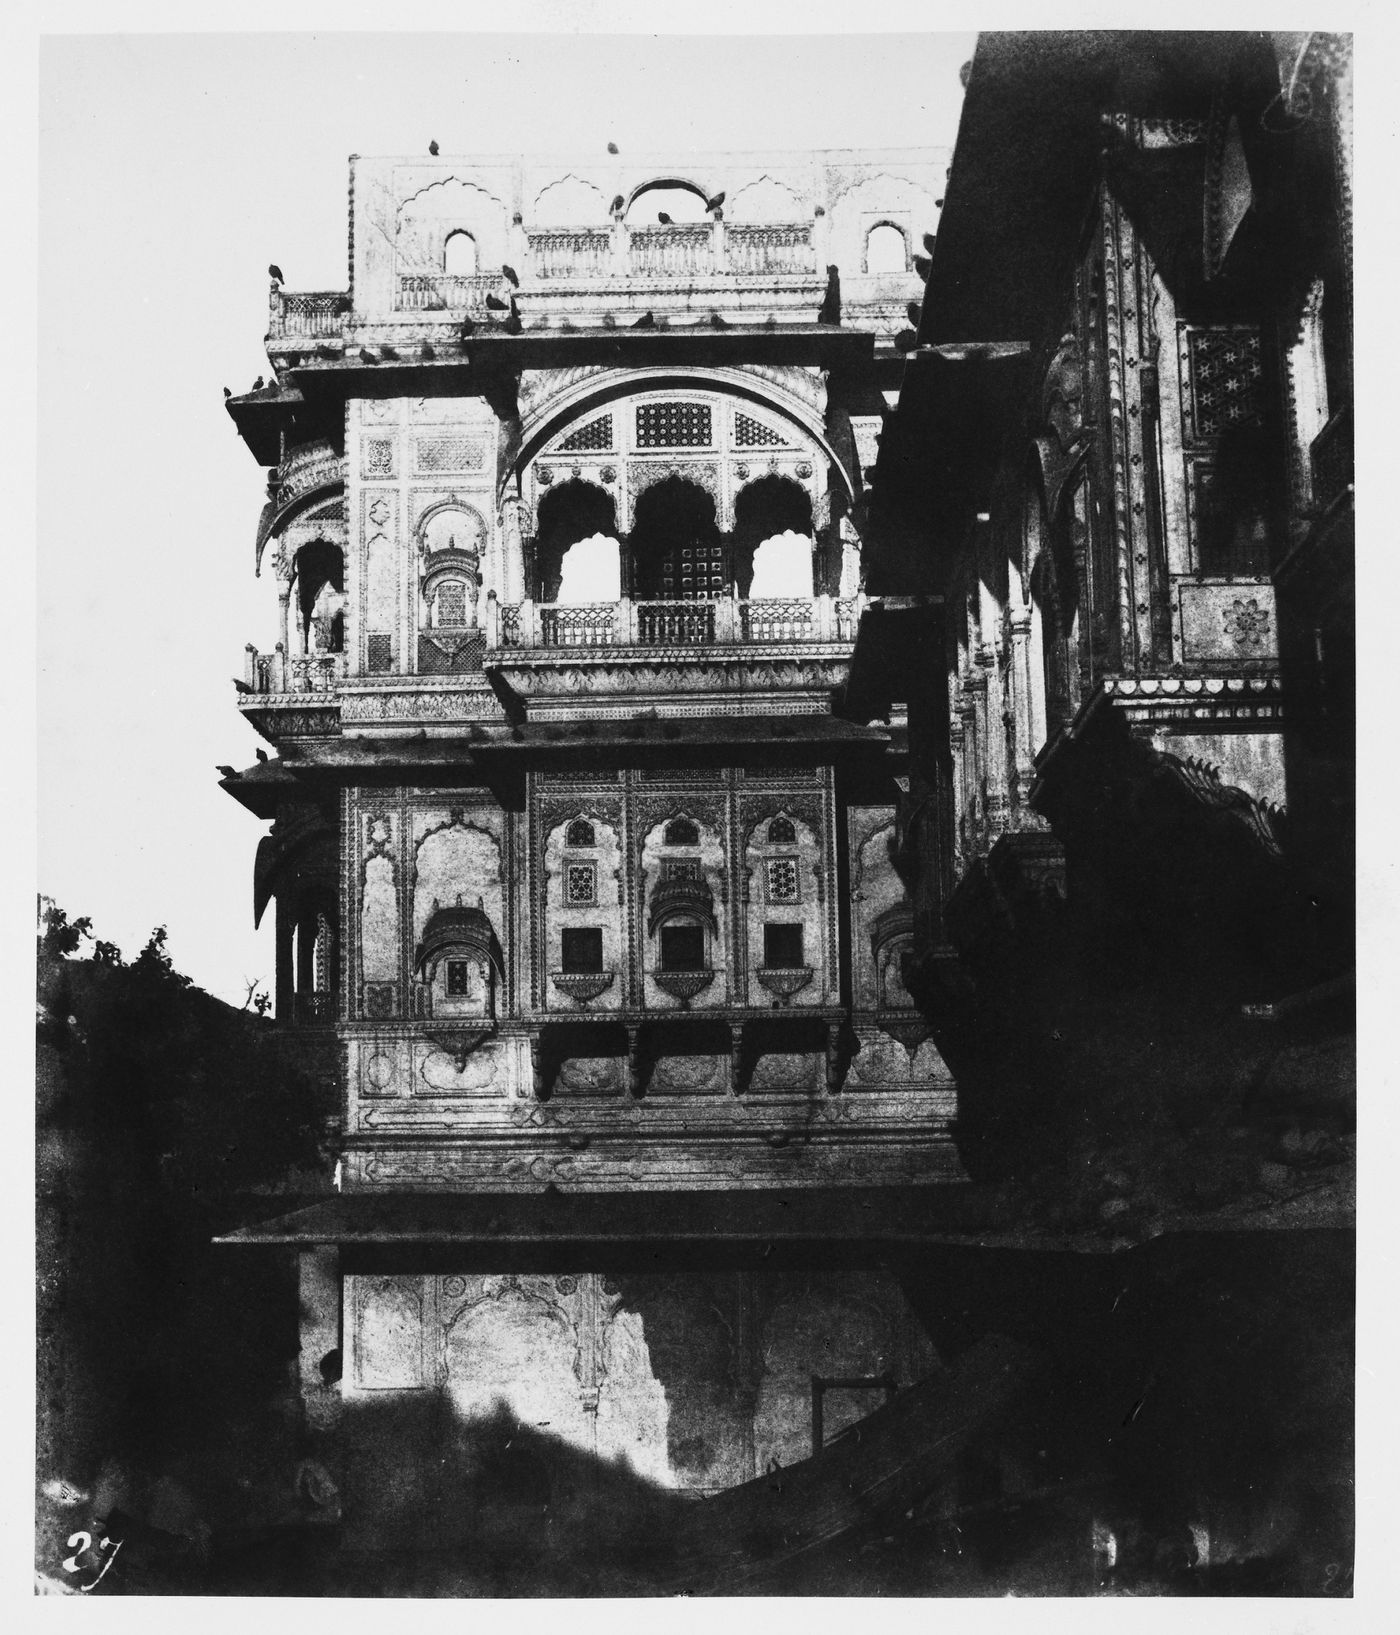 Partial view of a haveli showing an ornate façcade with a balcony and windows, Ajmere (now Ajmer), India